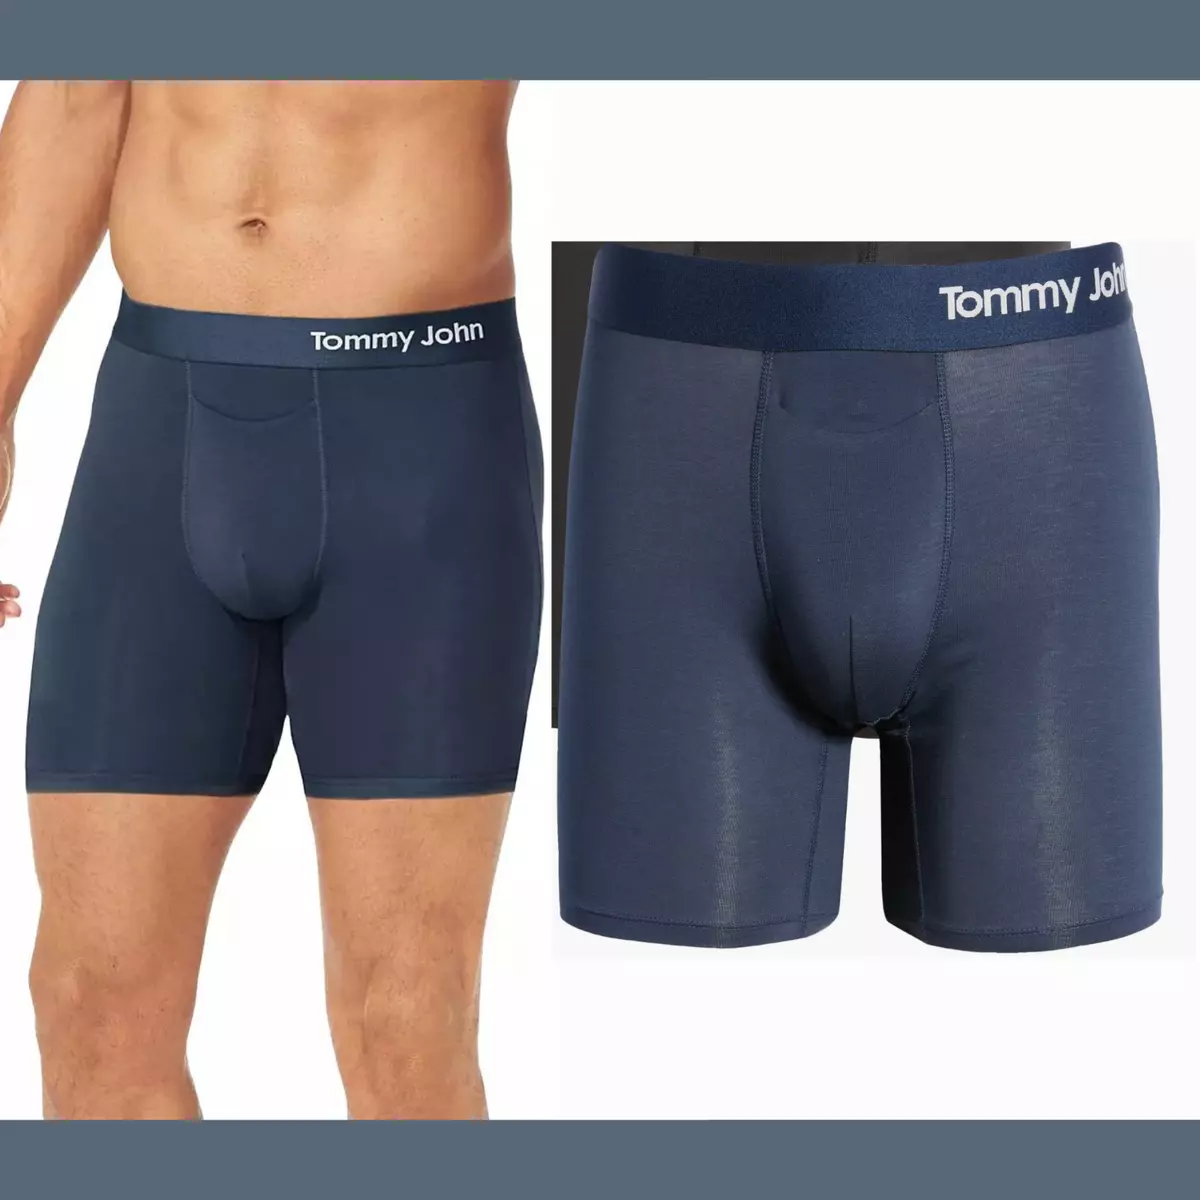 NWT $32 TOMMY JOHN [ Large ] Cool Cotton 6-Inch Boxer Briefs in Navy Blue  #5987